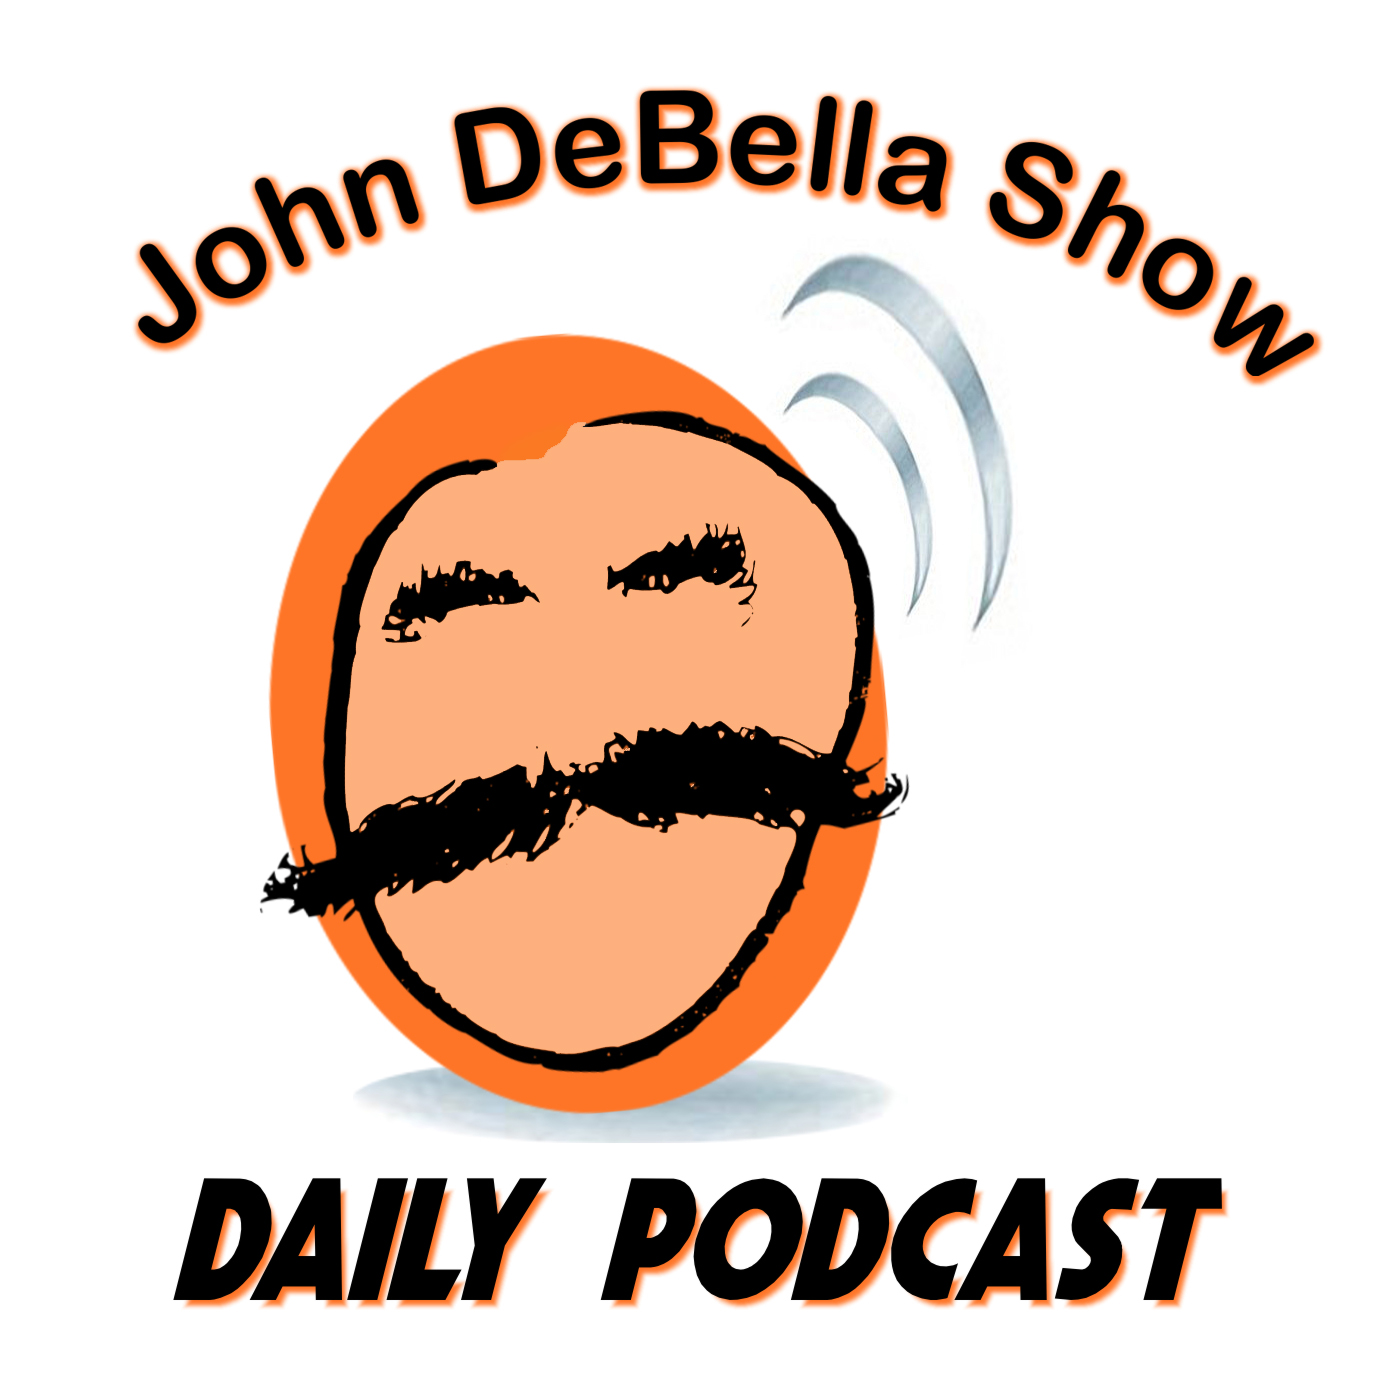 The Daily Podcast (06/16/21)